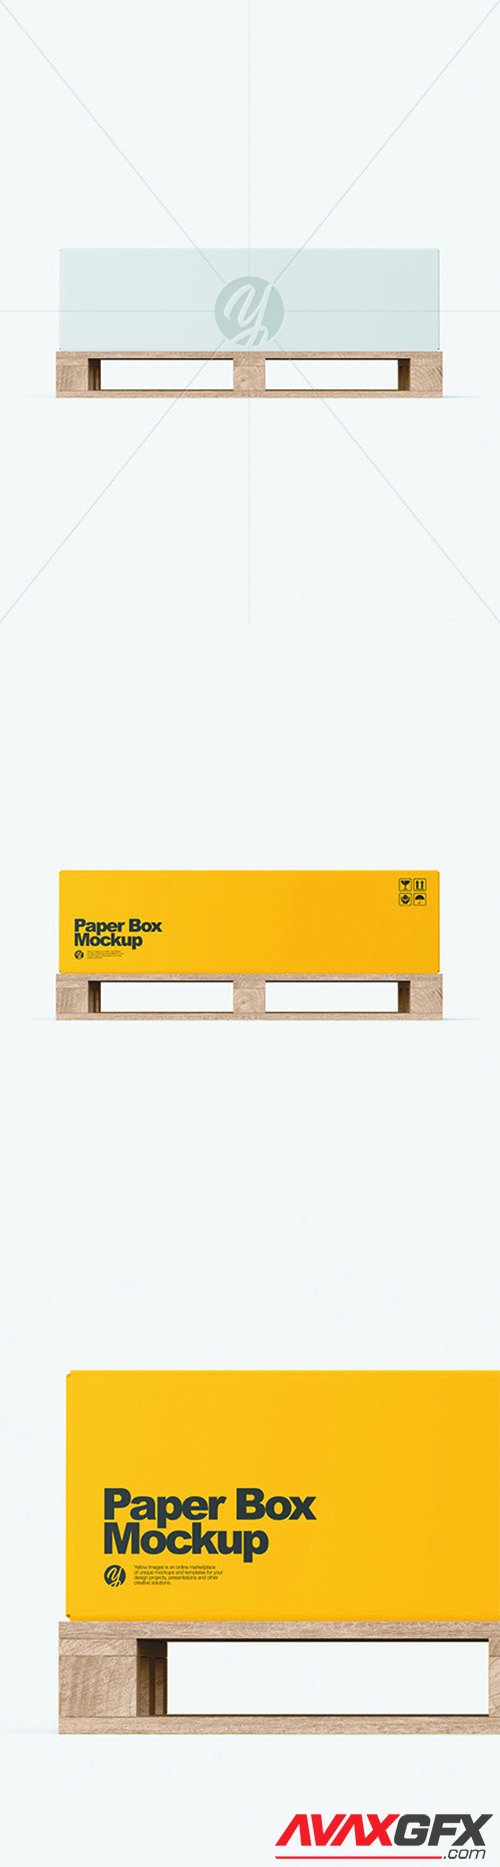 Wooden Pallet With Paper Box Mockup 66355